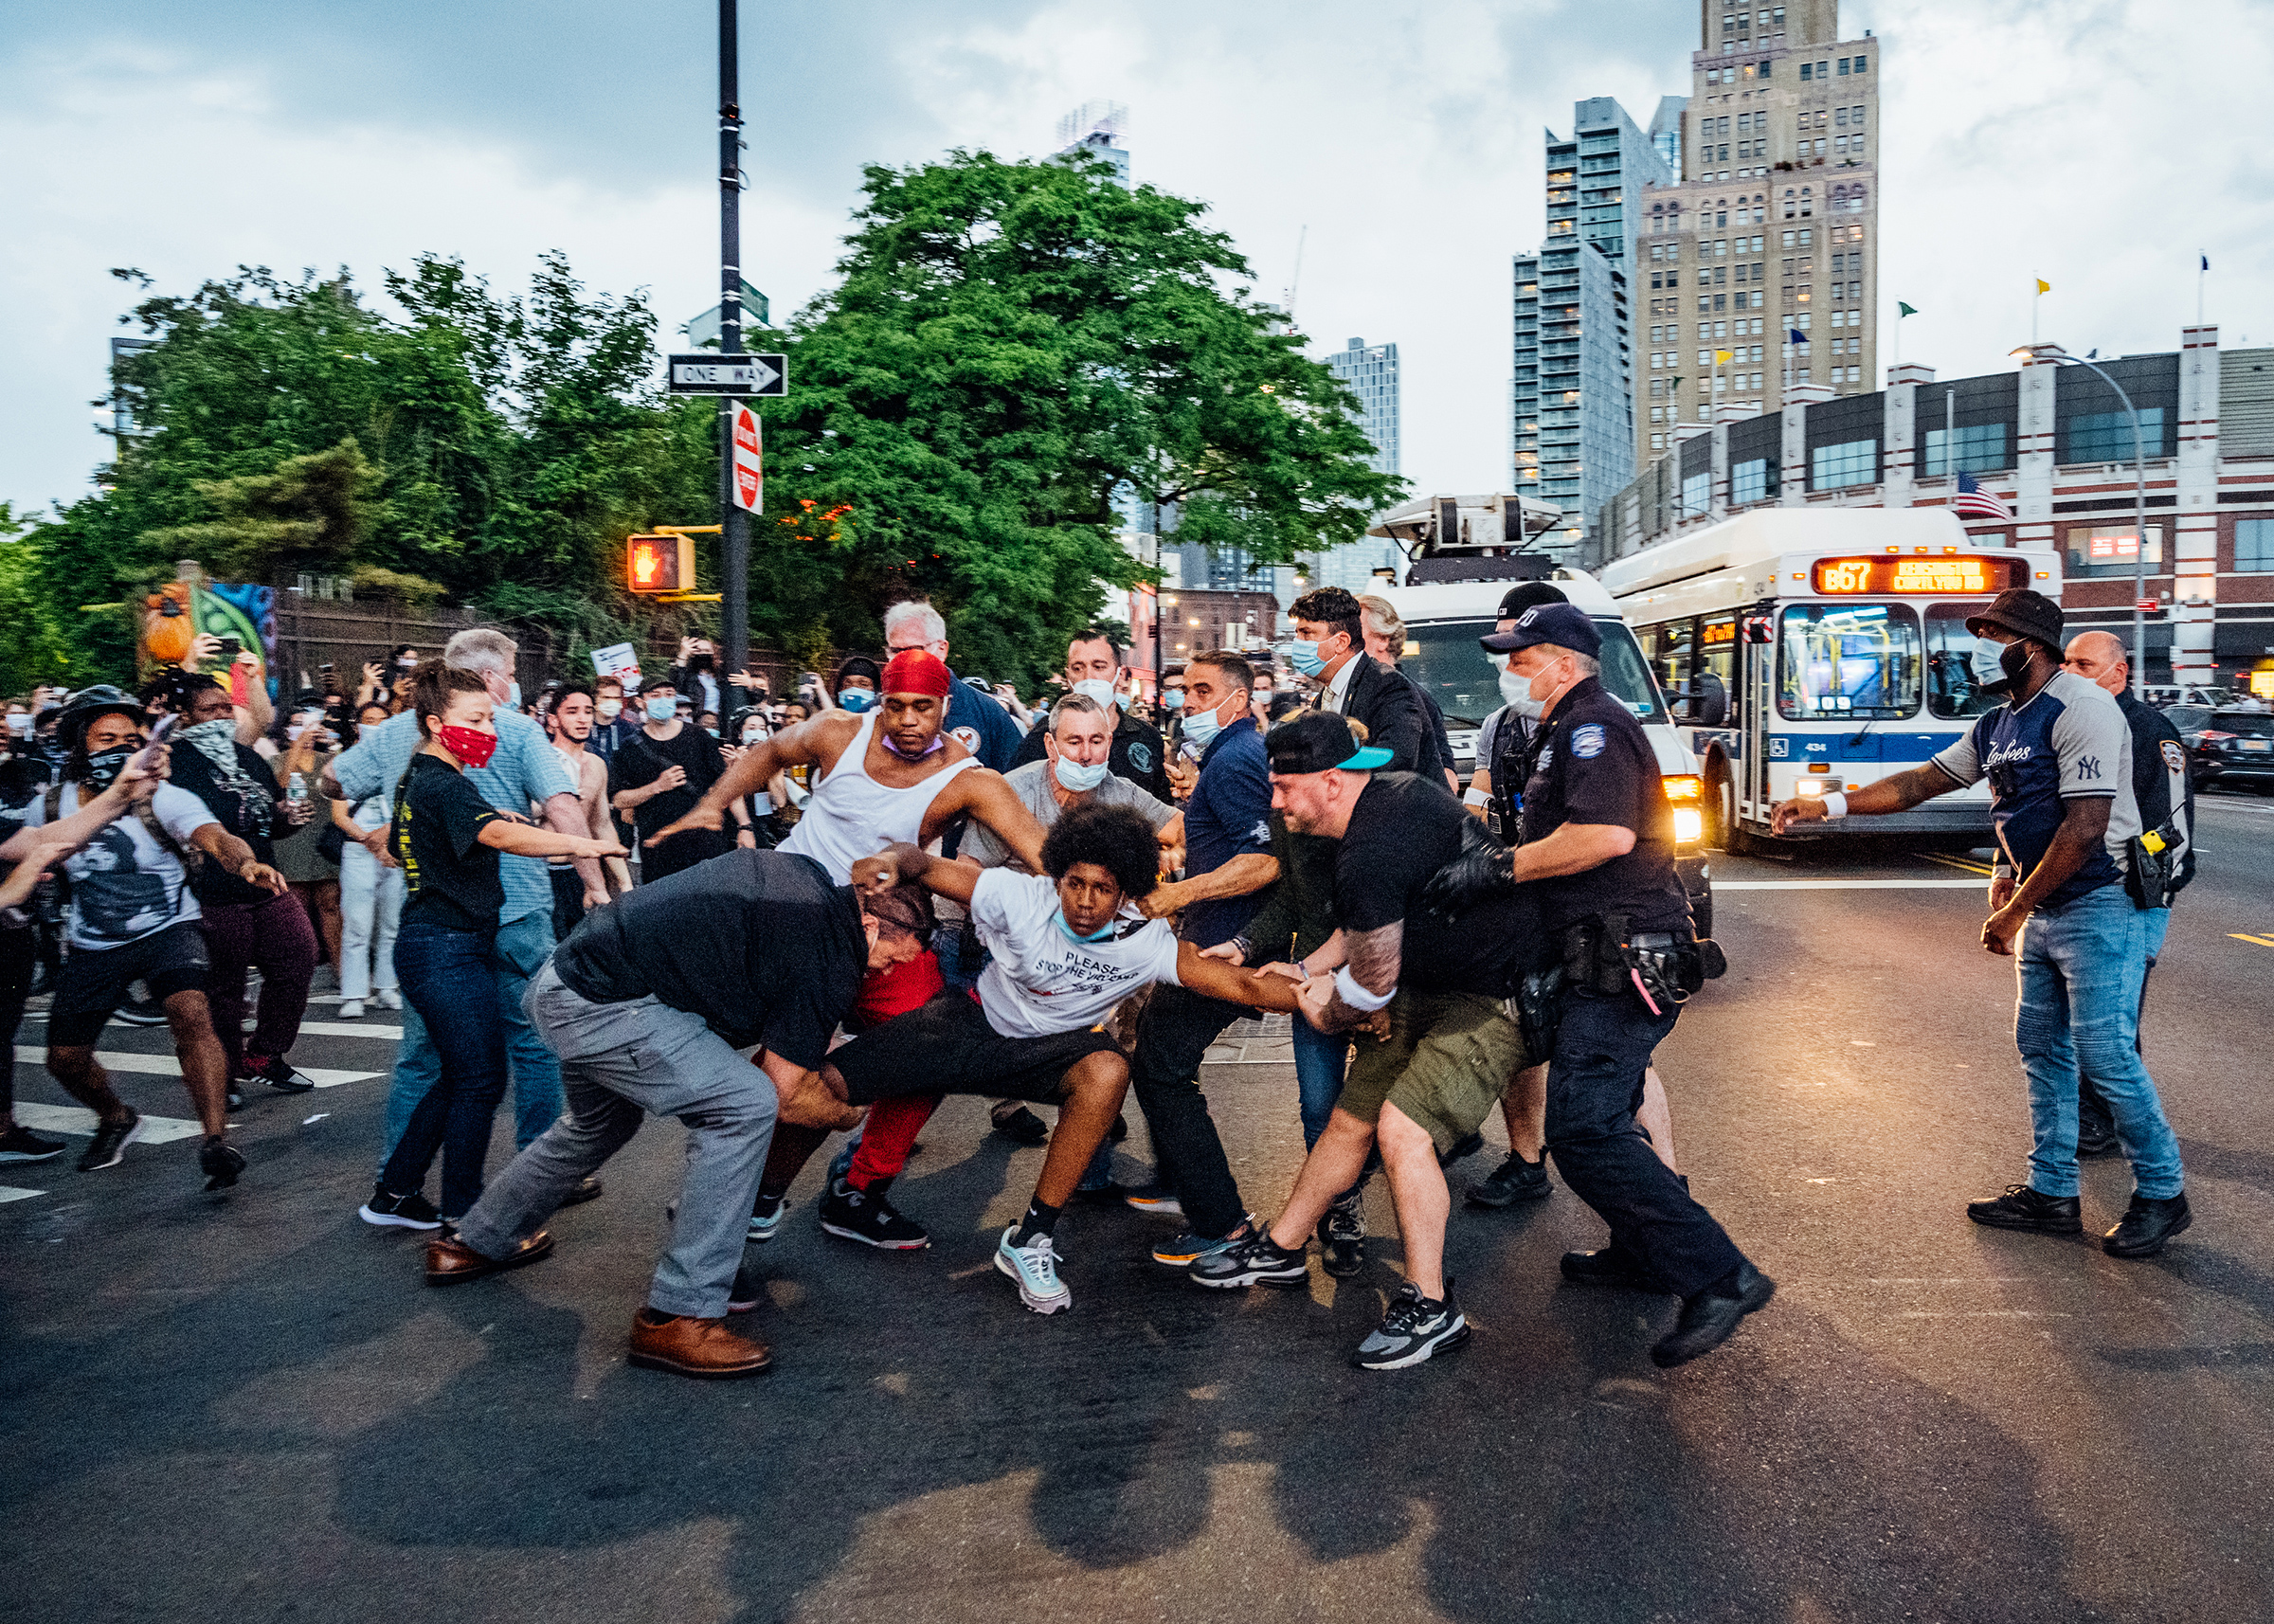 A protester, wearing a shirt that reads "Please Stop the Violence," is dragged near Brooklyn's Barclays Center on May 29, four days after George Floyd's death. (Malike Sidibe for TIME)